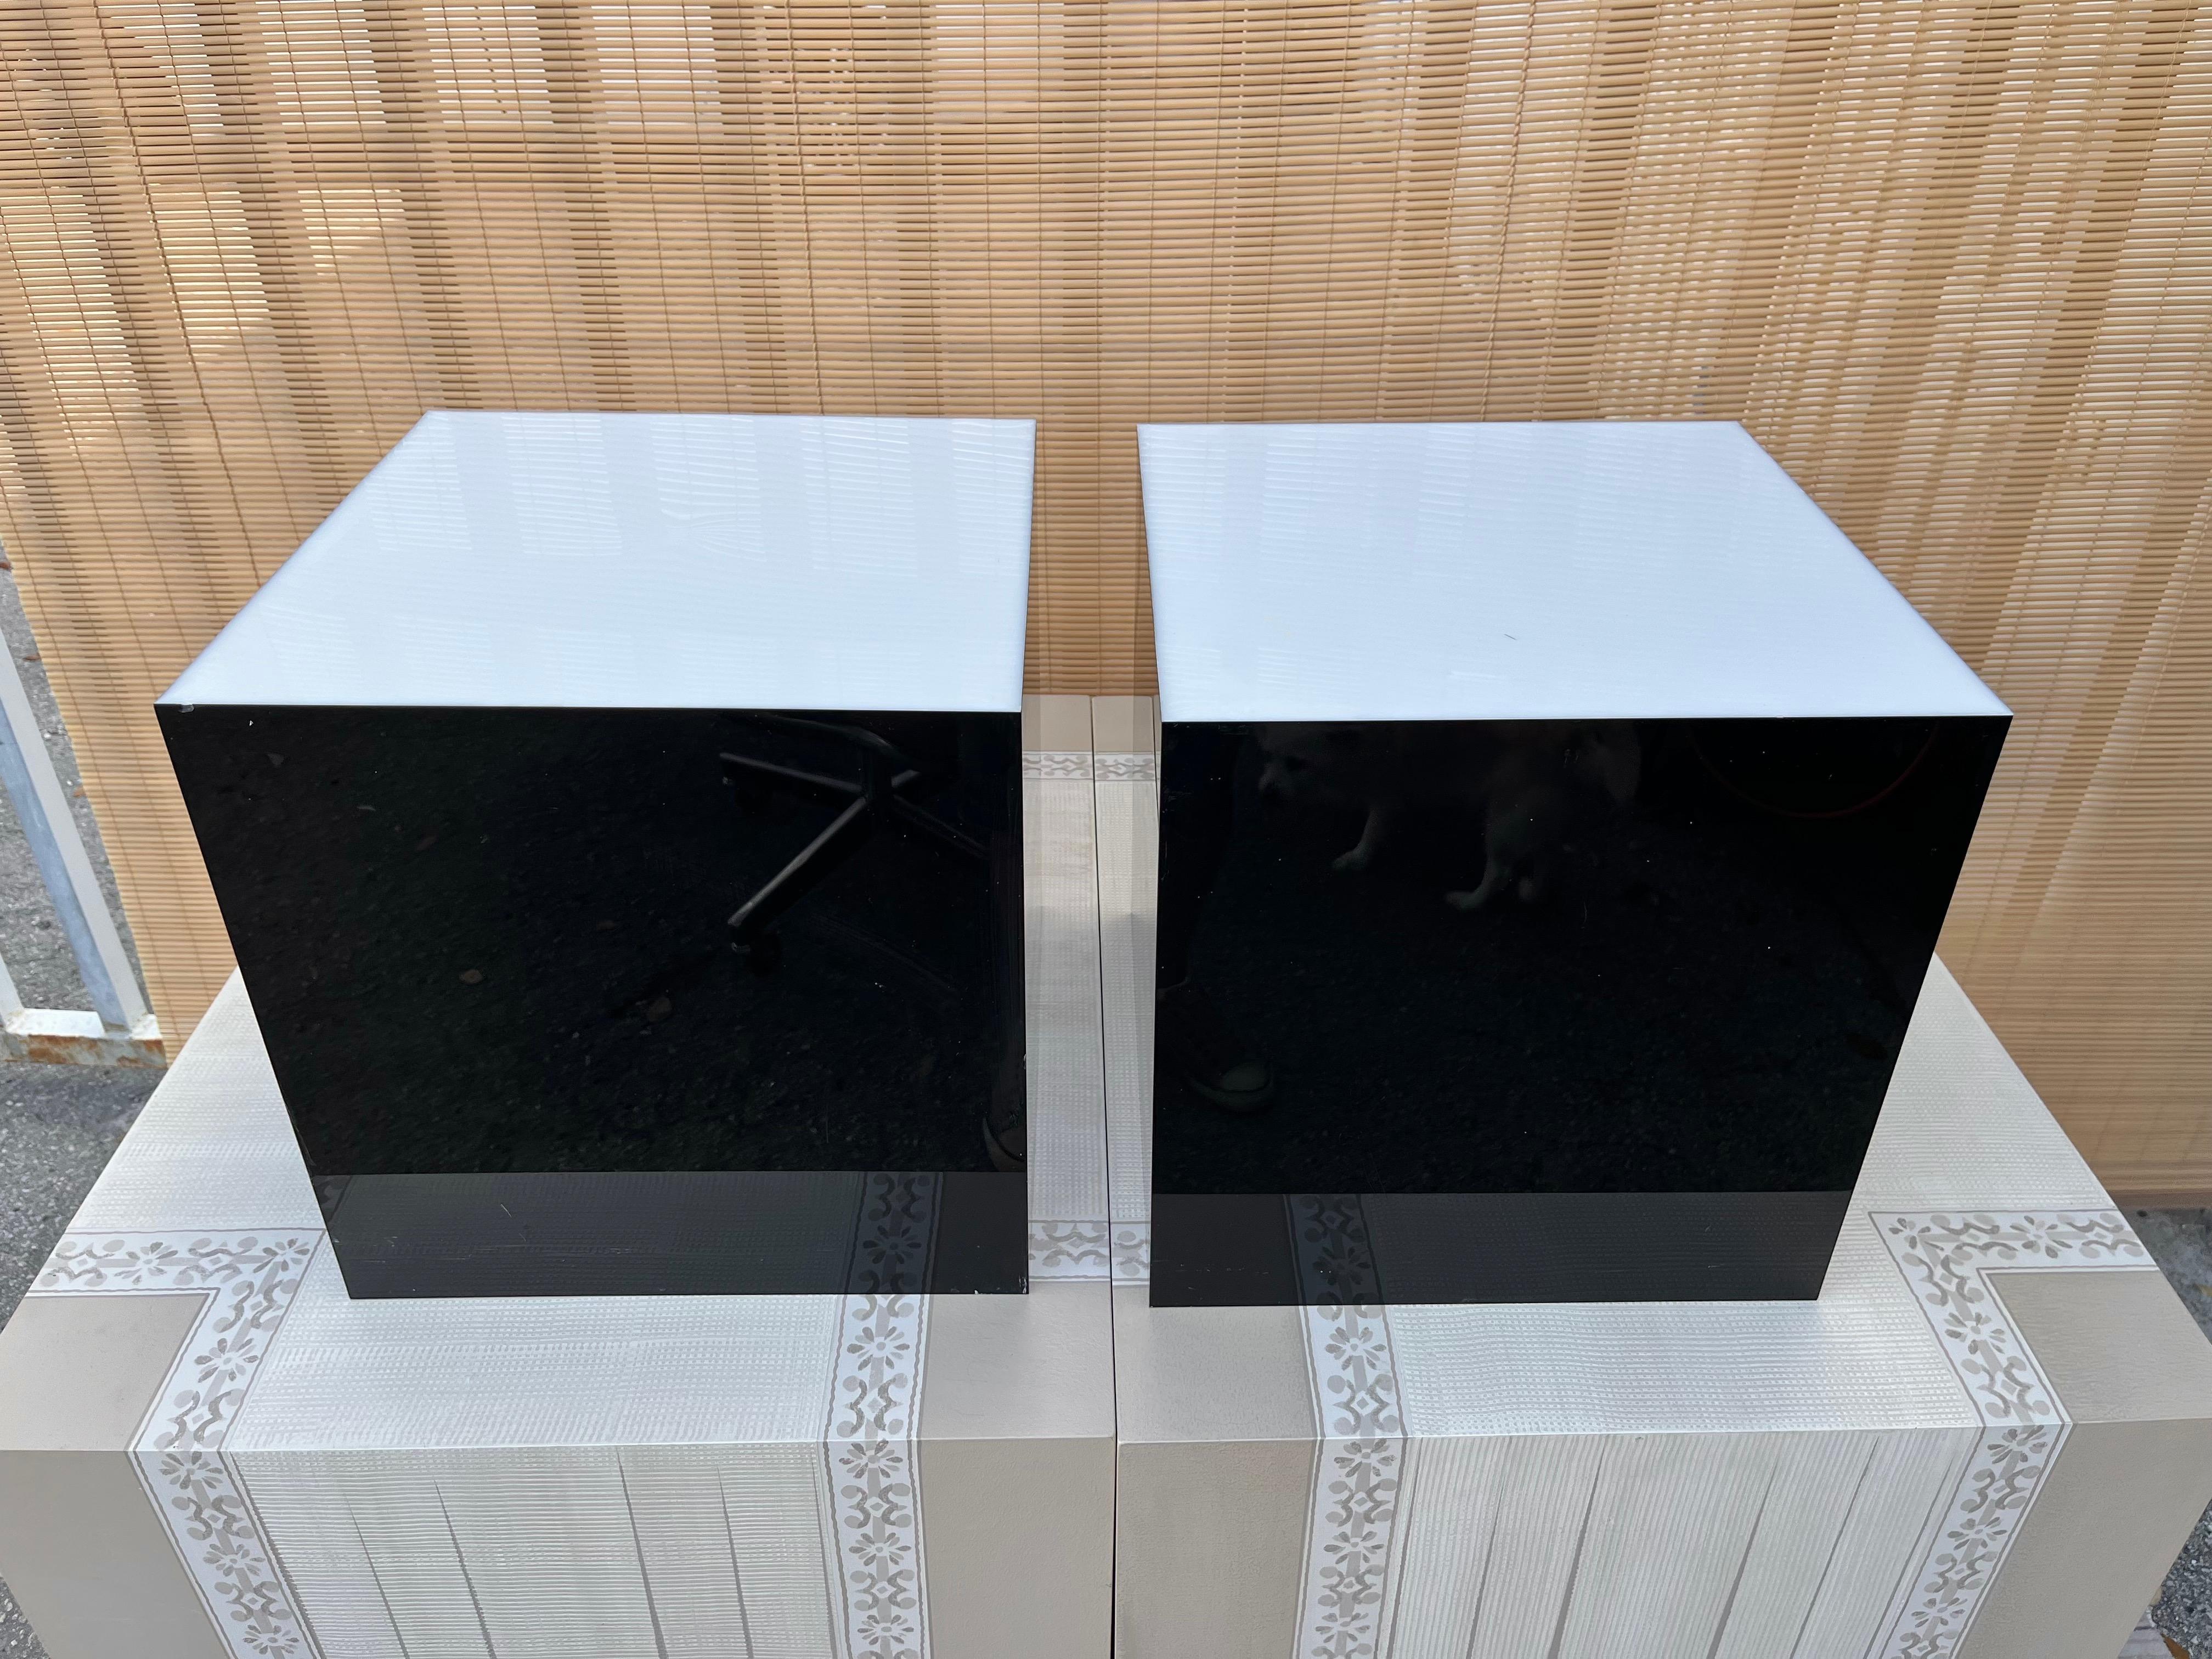 American Pair of 1970s Mid-Century Modern Black Lucite Cube Table Lamps For Sale